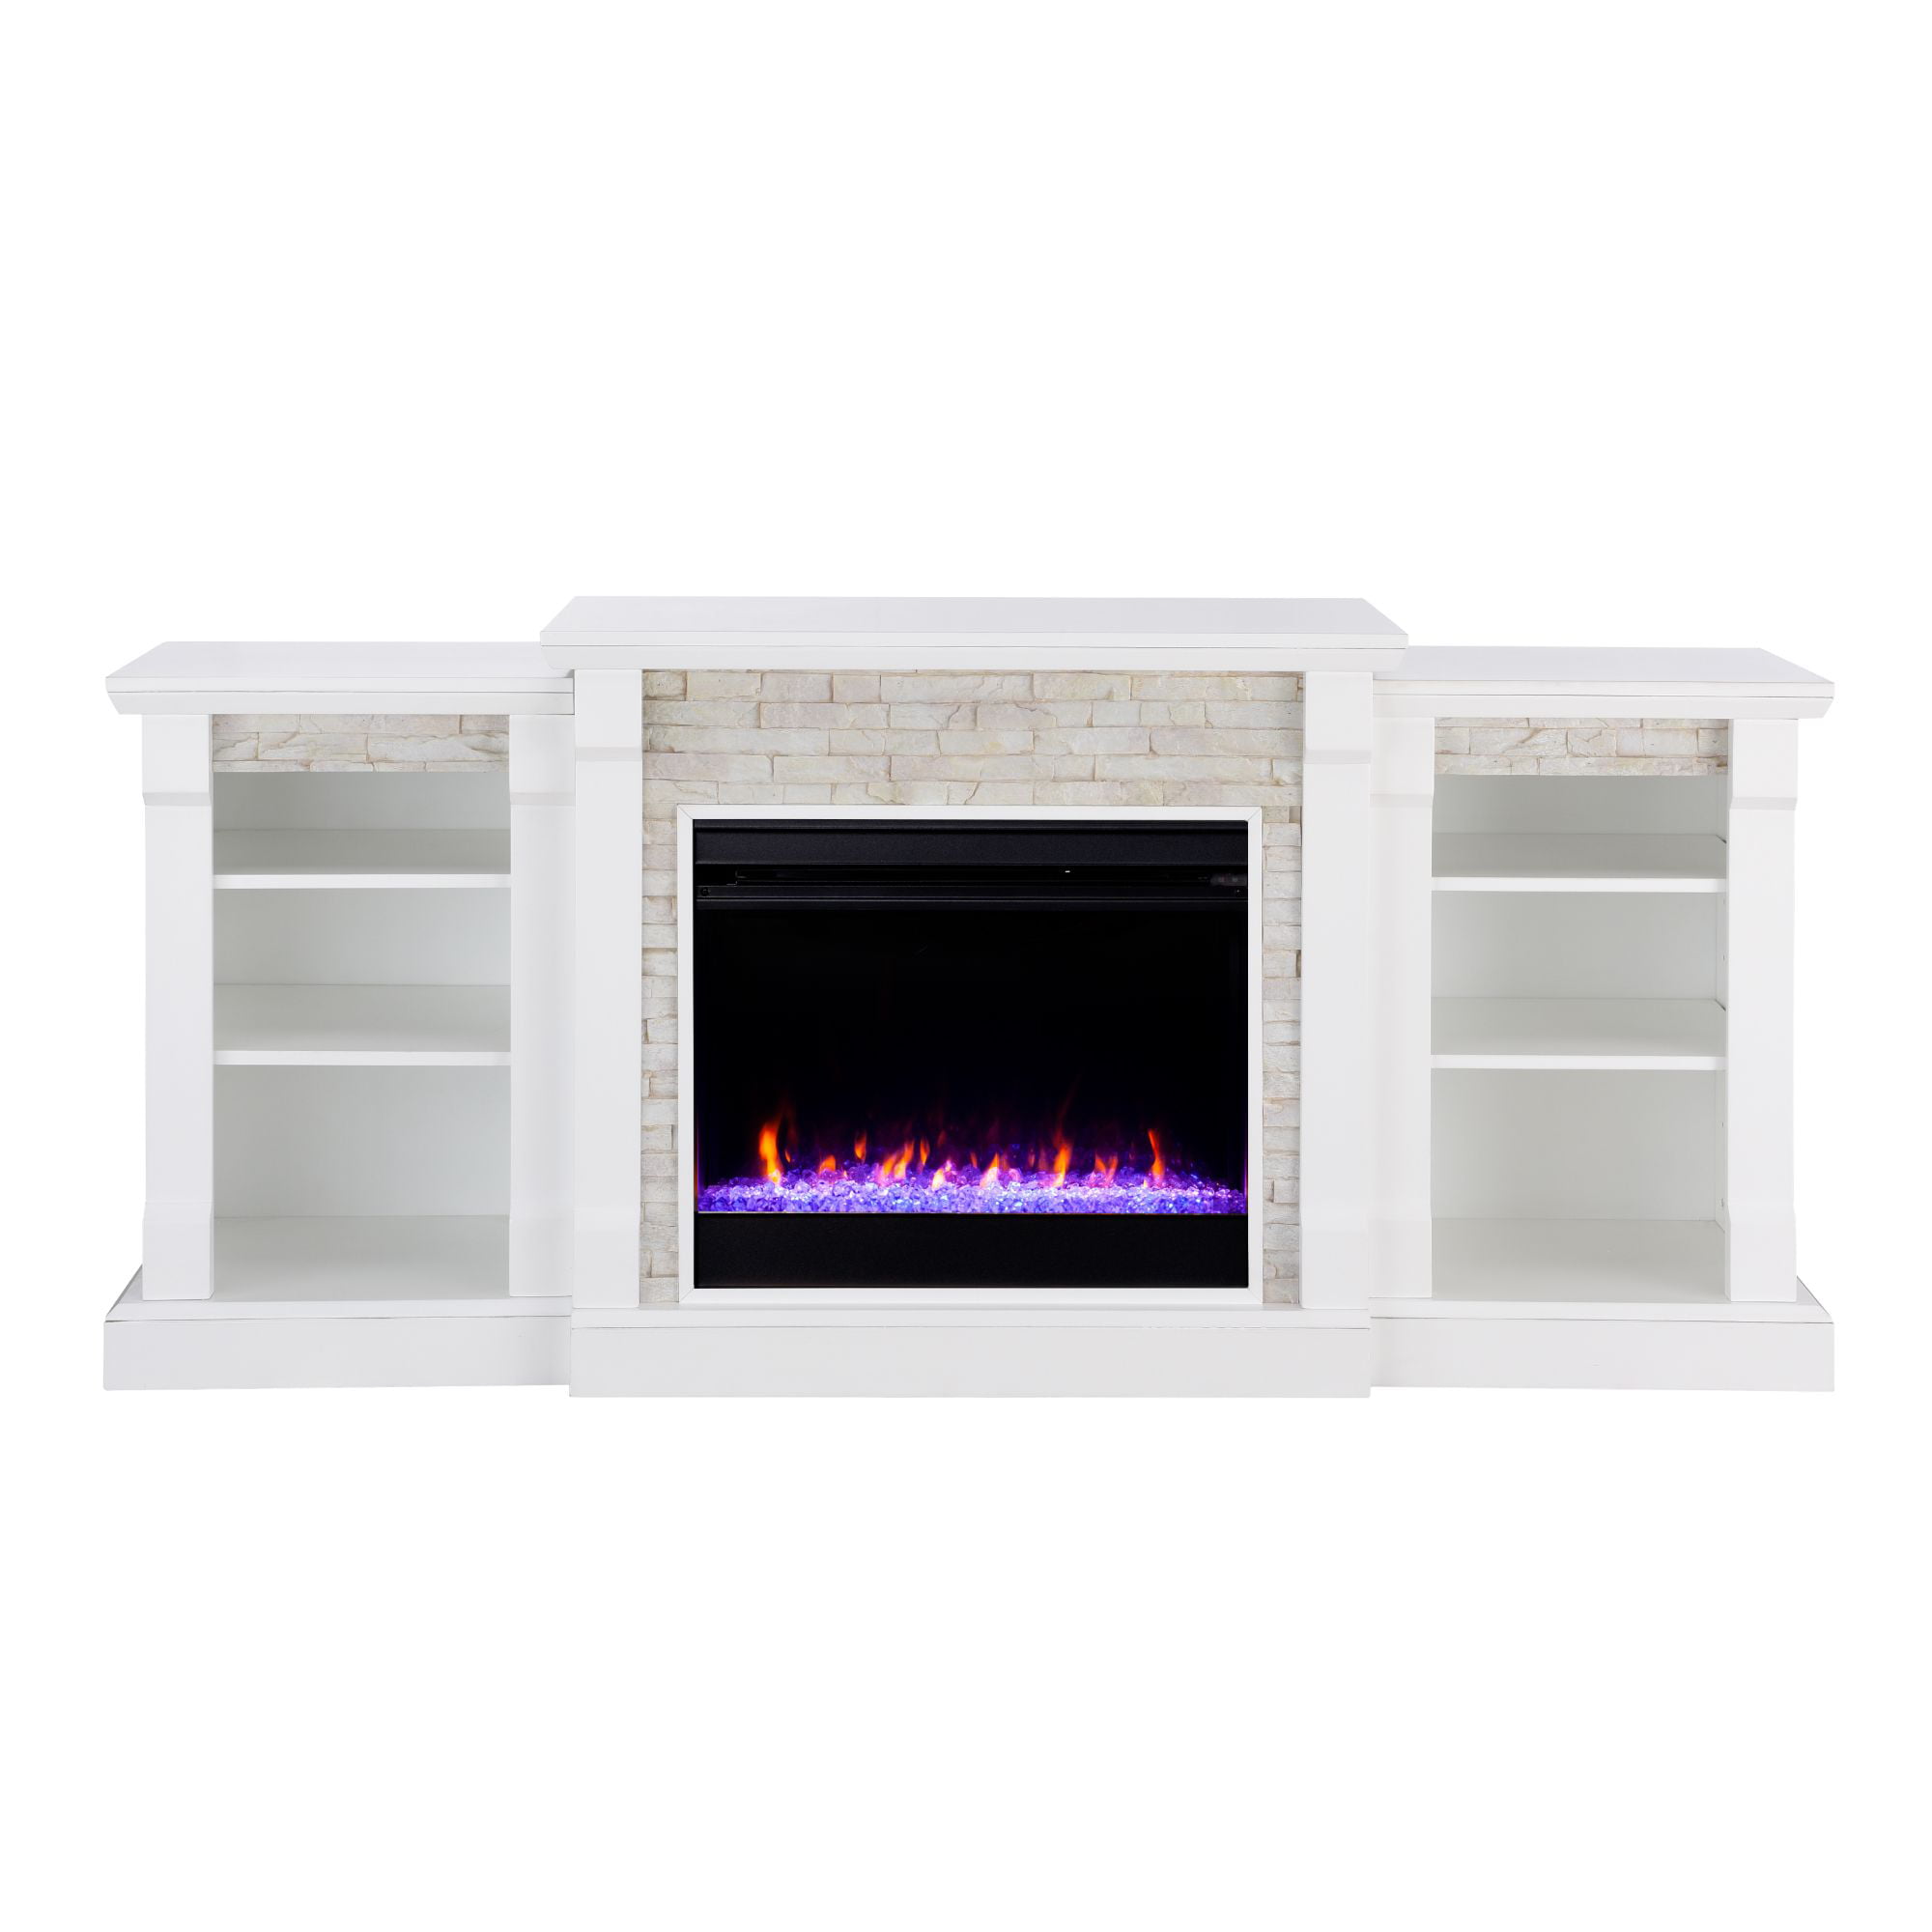 71.75" White Solid Electric Fireplace with Bookcase - Walmart.com